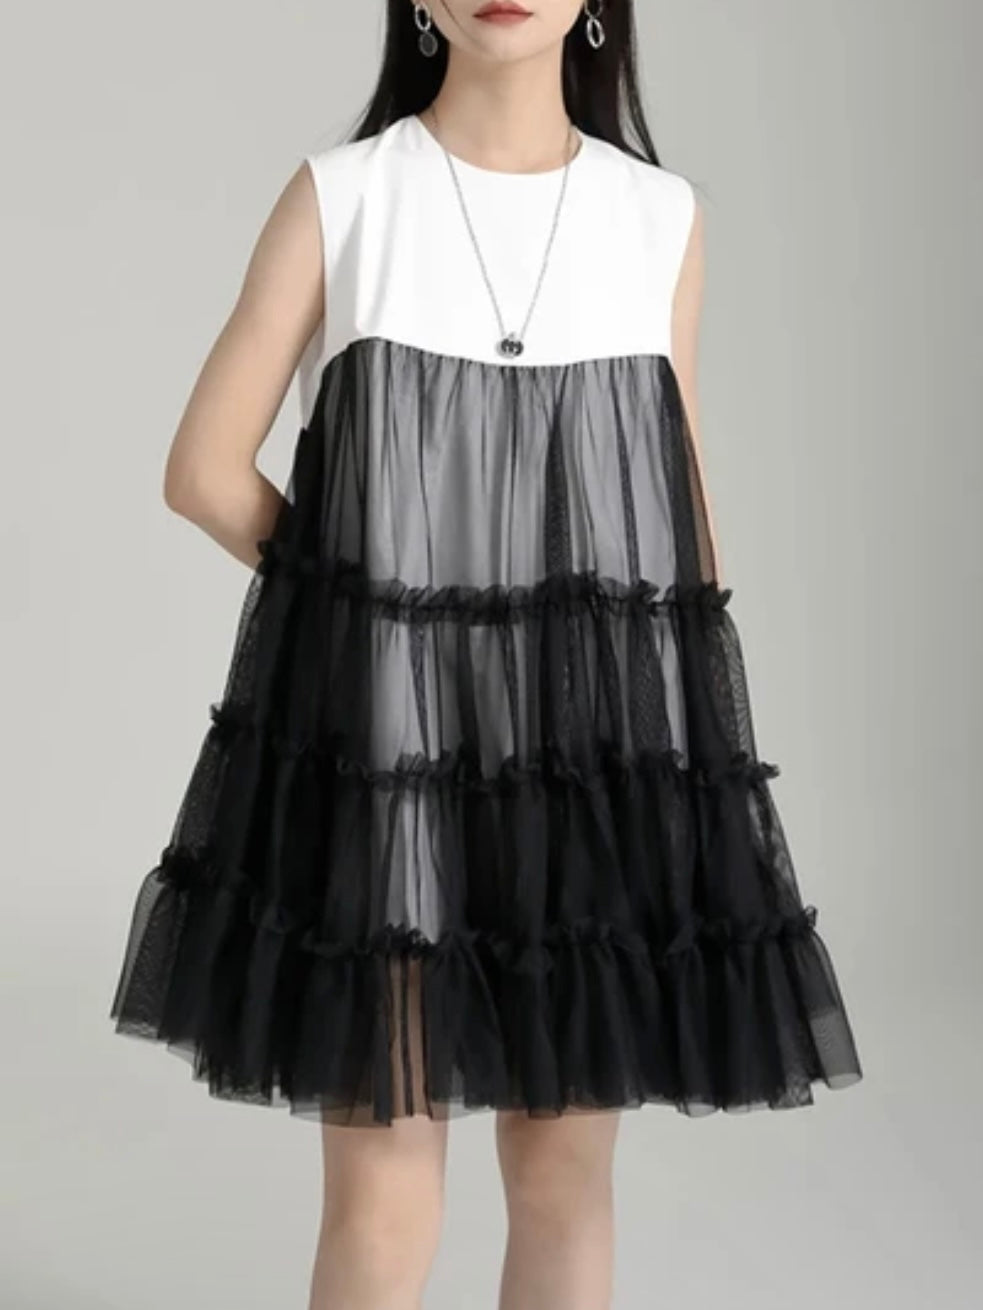 Black and white layered a-line short dress